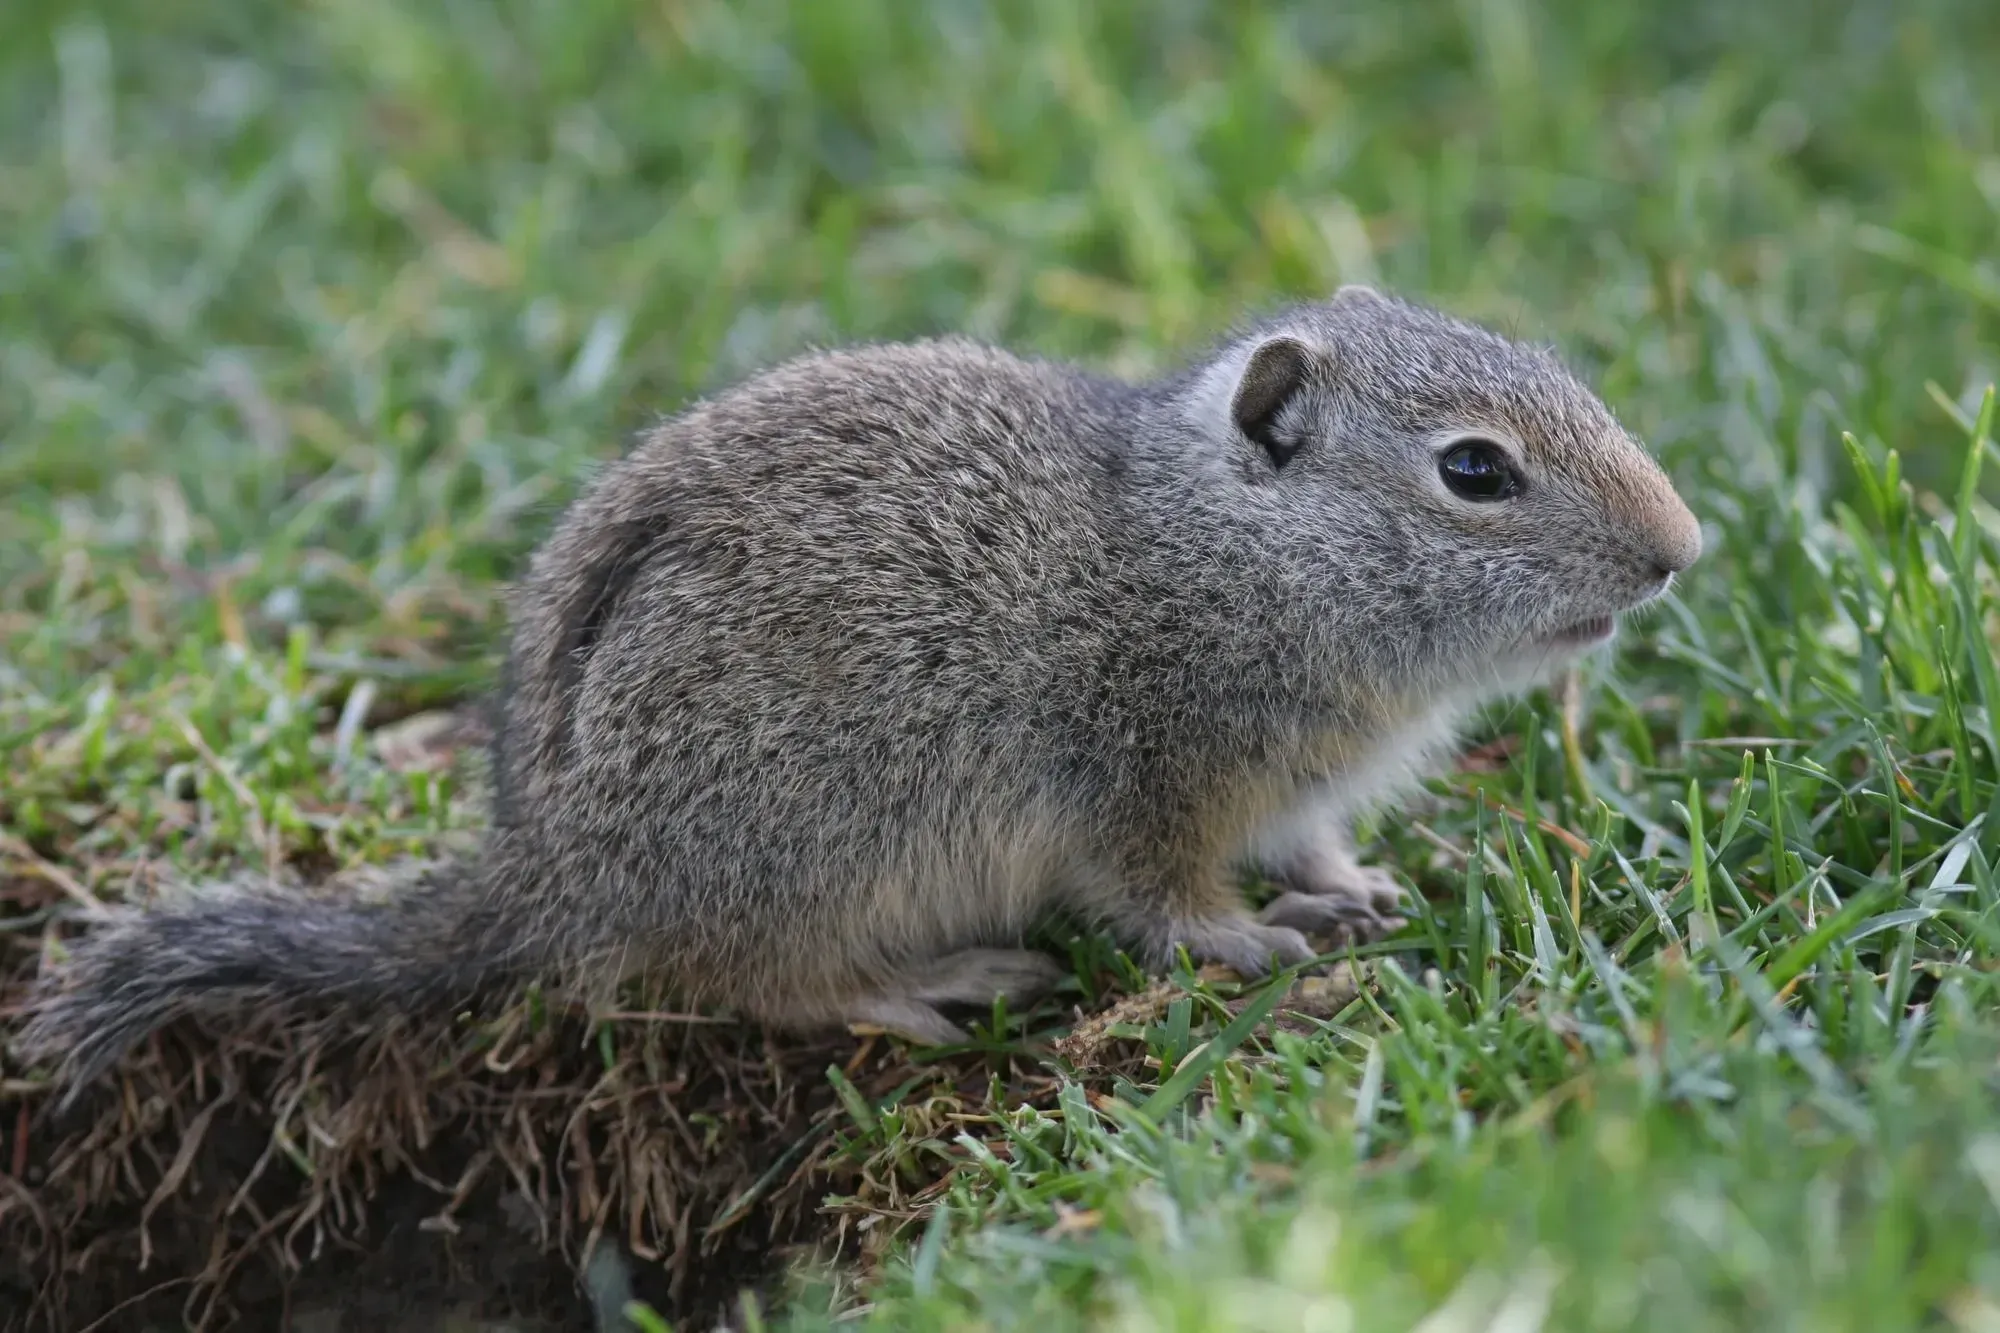 The Uinta ground squirrel is a cinnamon-colored squirrel with a brown back.